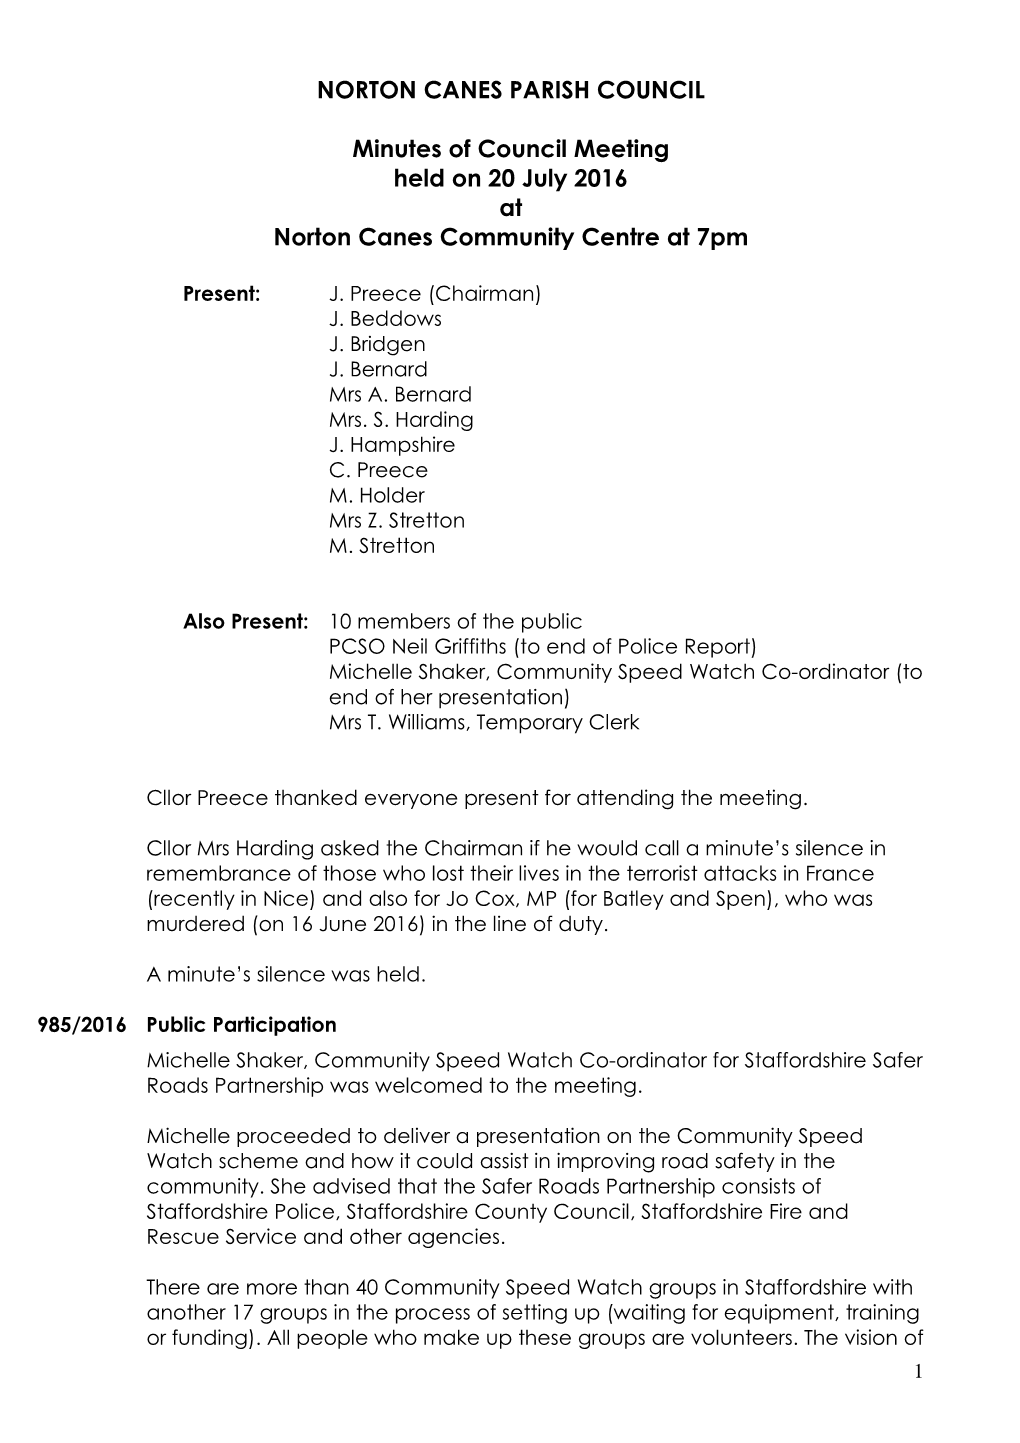 NORTON CANES PARISH COUNCIL Minutes of Council Meeting Held On